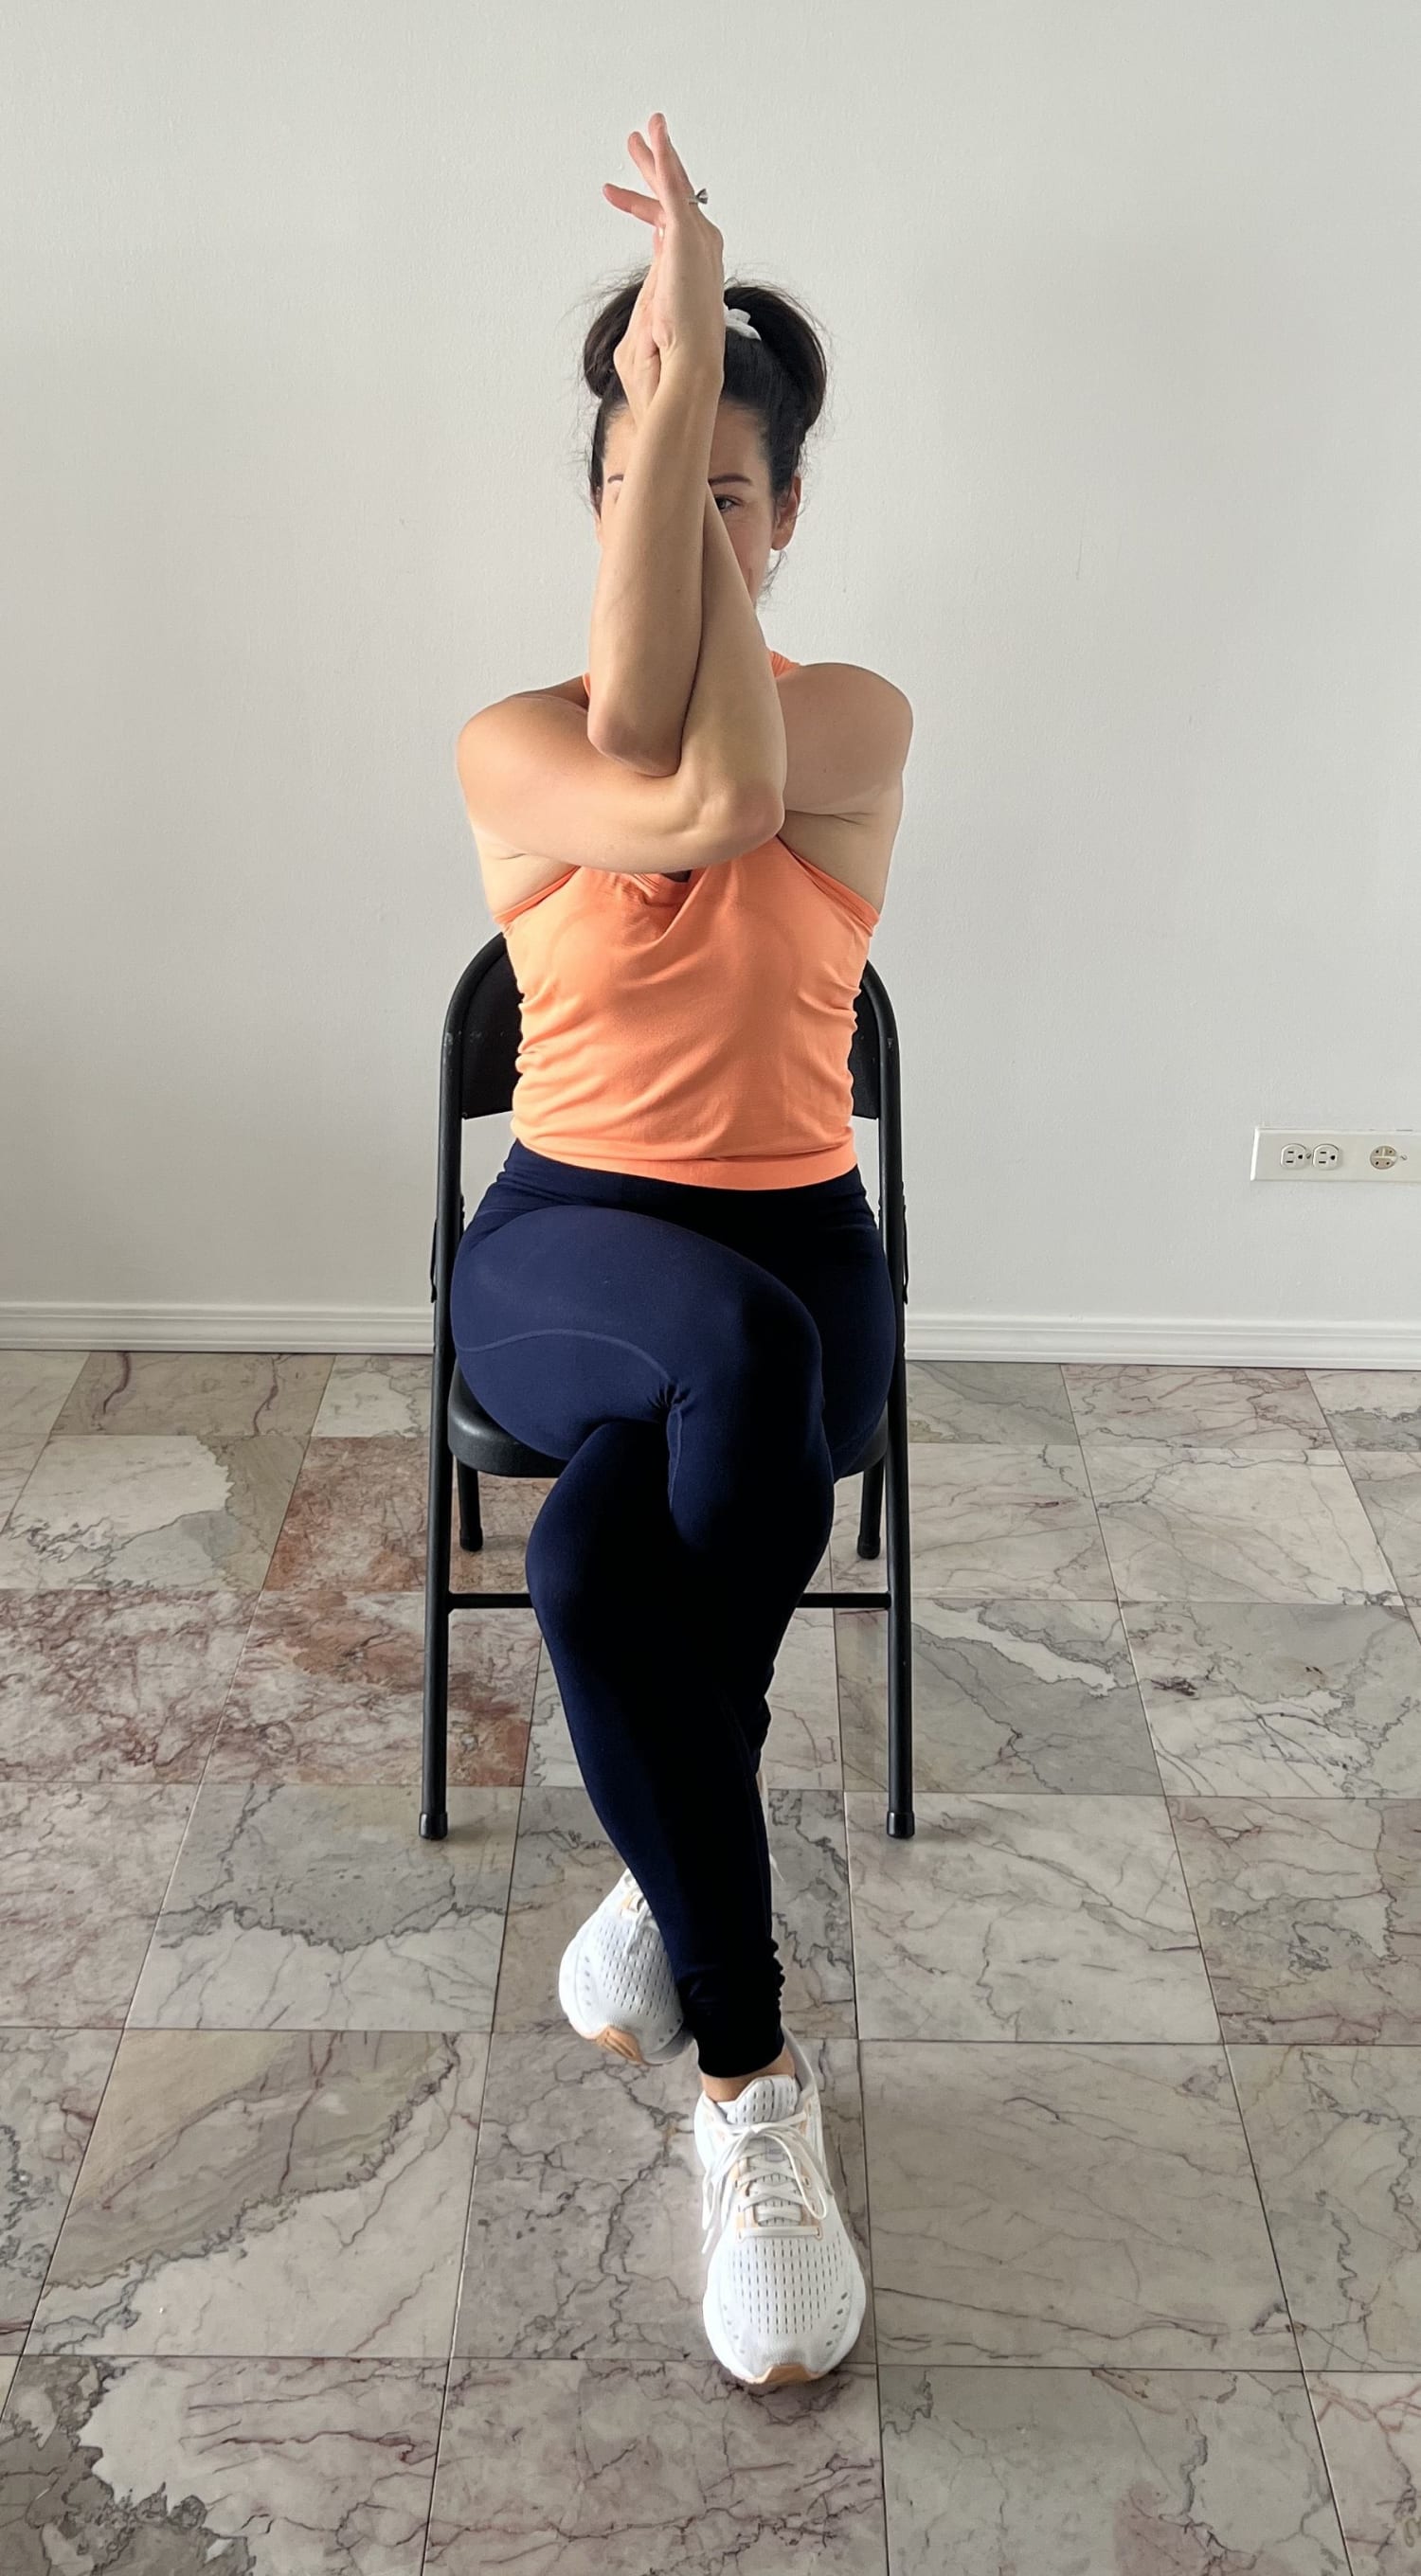 Passing the Bar Exam One Asana At a Time Part III: Poses to Counteract  Sitting and Poor Posture While Studying - Bar Exam Toolbox®